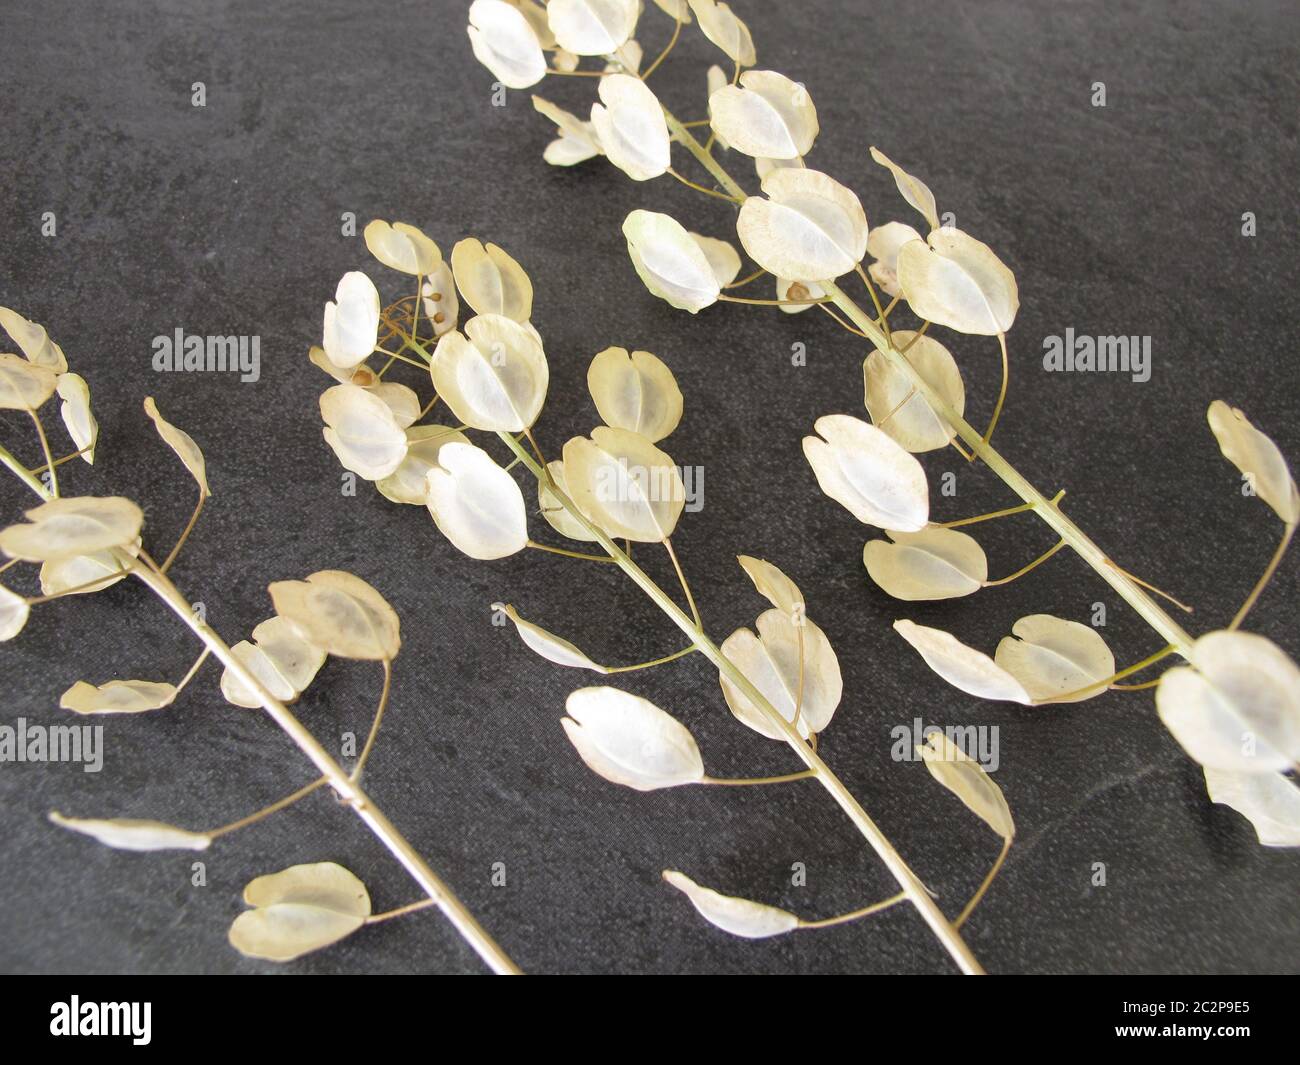 Stemps from field pennycress with edible seeds Stock Photo